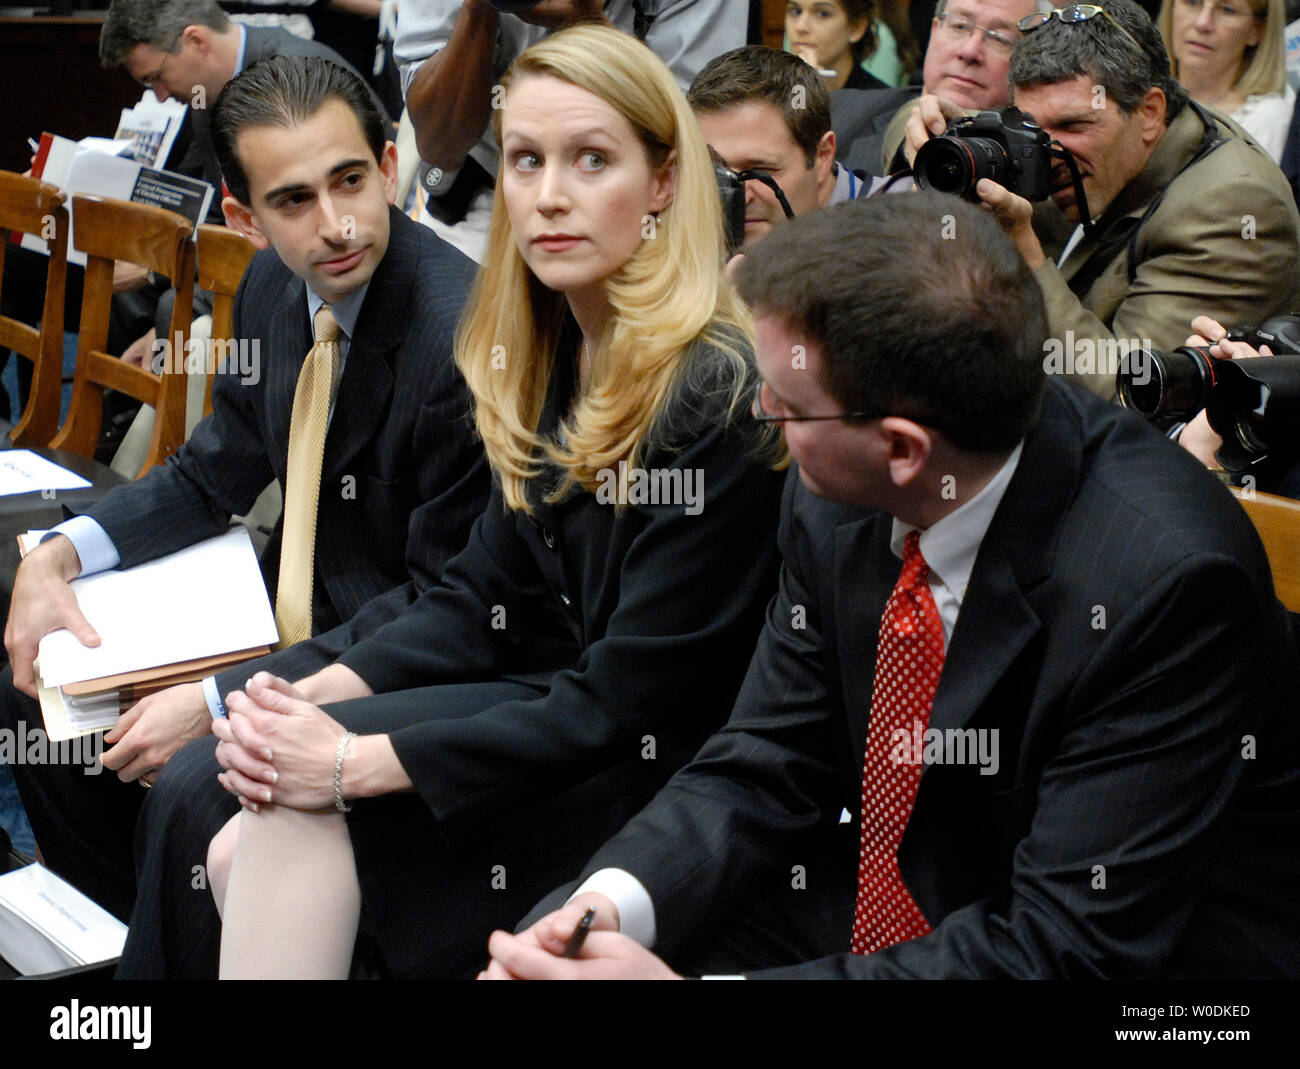 Monica Goodling, former Justice Department White House Liaison, sits with members of her counsel prior to testifying before a House Judiciary Committee hearing on the firings of U.S. Attorneys, on Capitol Hill in Washington on May 23, 2007. (UPI Photo/Kevin Dietsch) Stock Photo